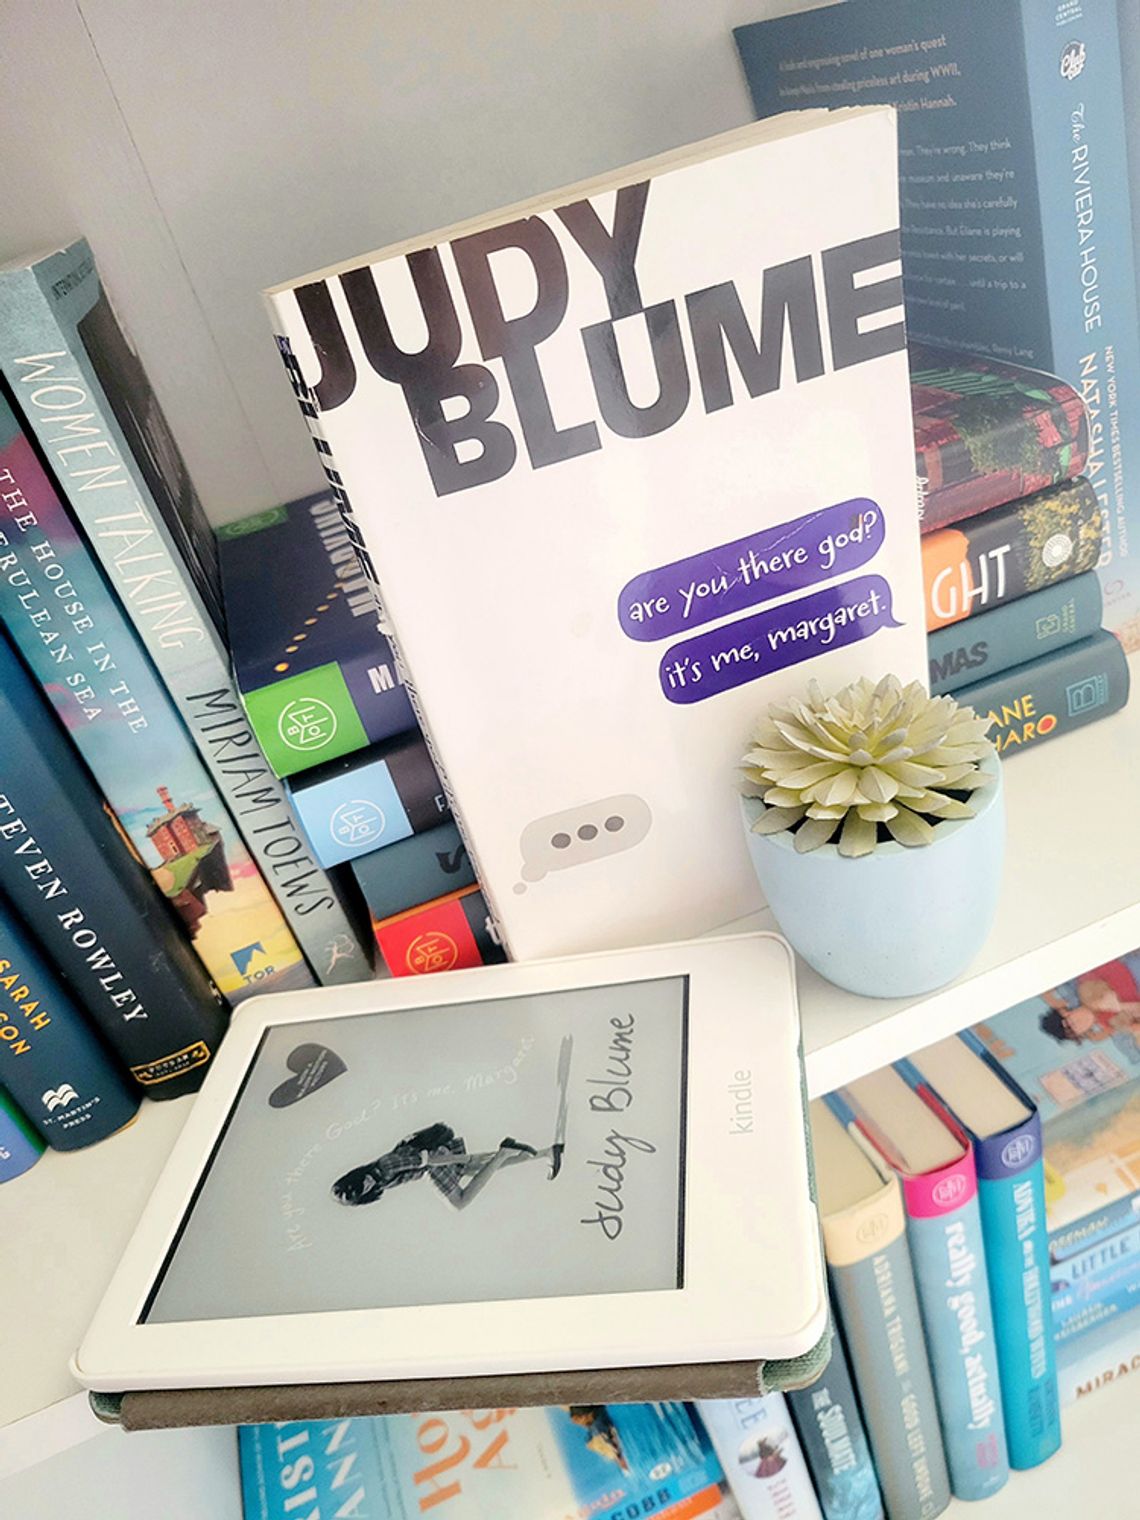 Allison’s Book Report — “Are You There God? It’s Me, Margaret” by Judy Blume